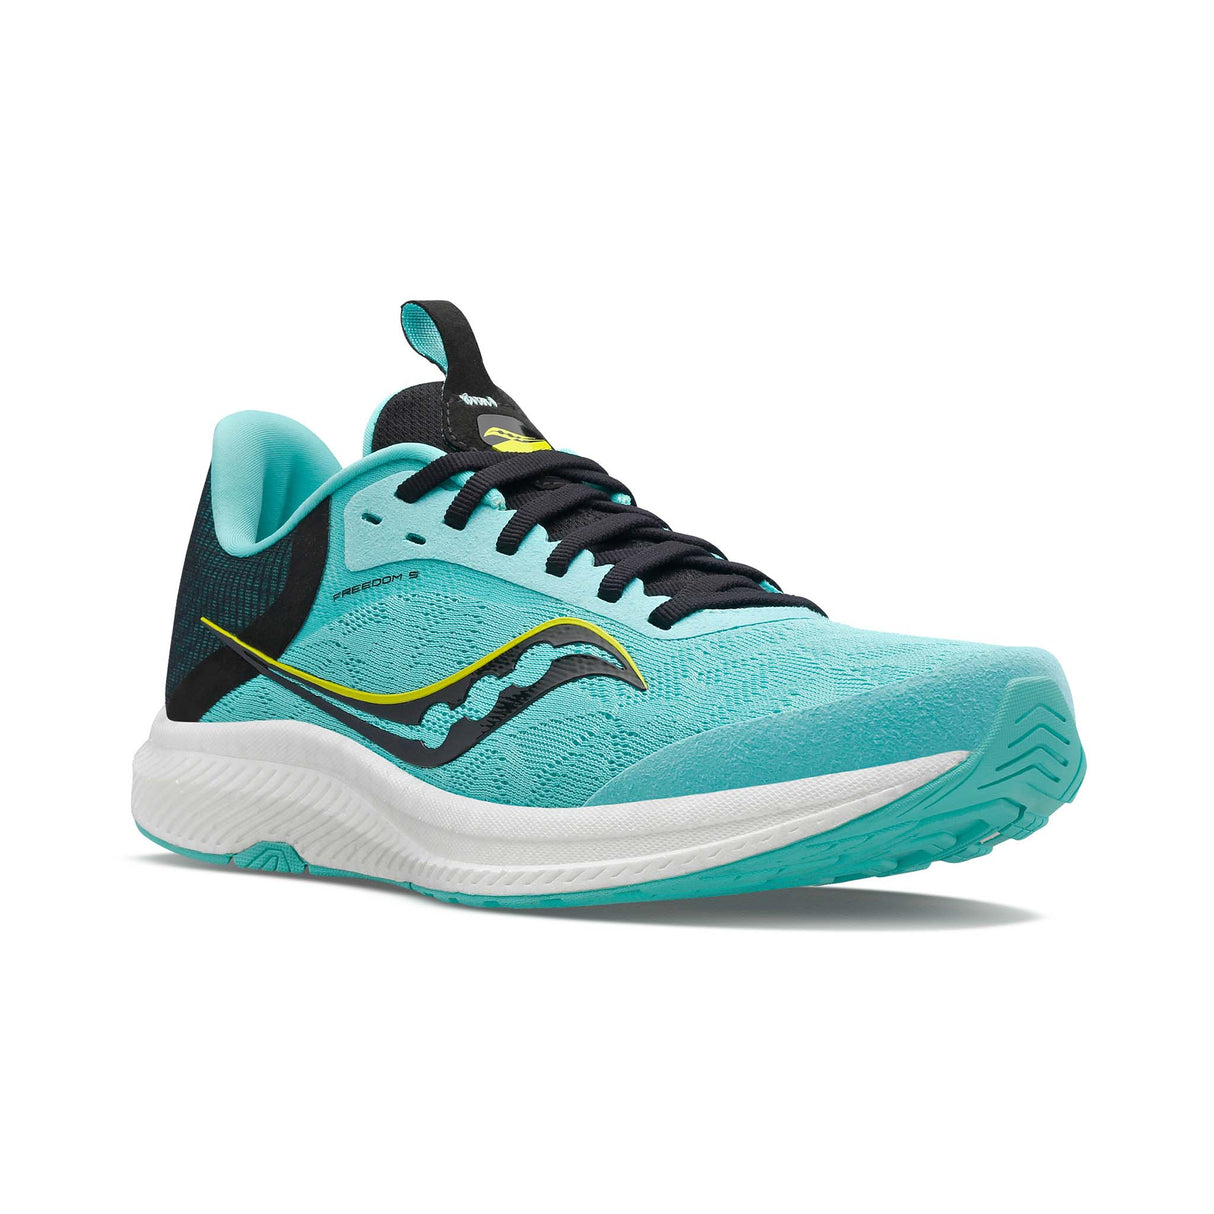 Saucony Freedom 5 running femme cool mint acid pointe